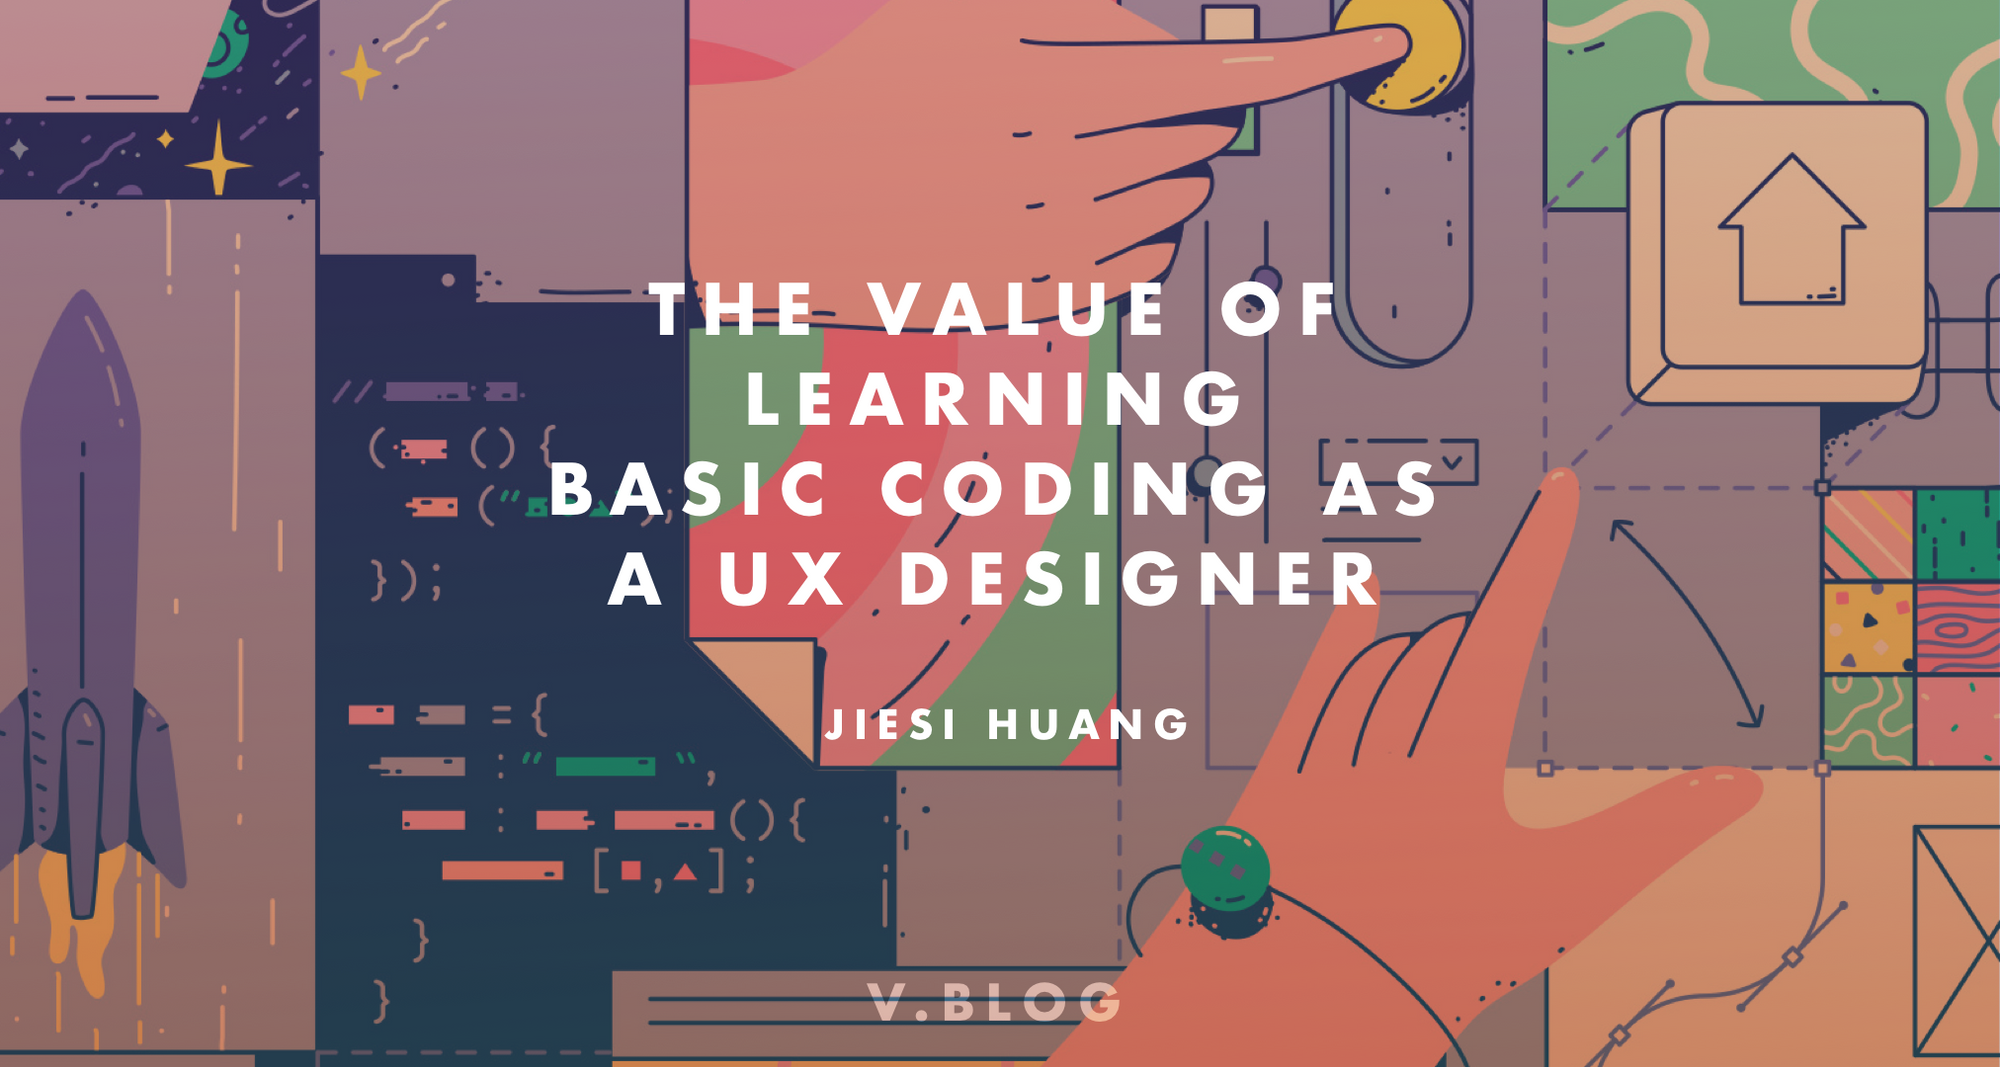 The Value of Learning Basic Coding as a UX Designer